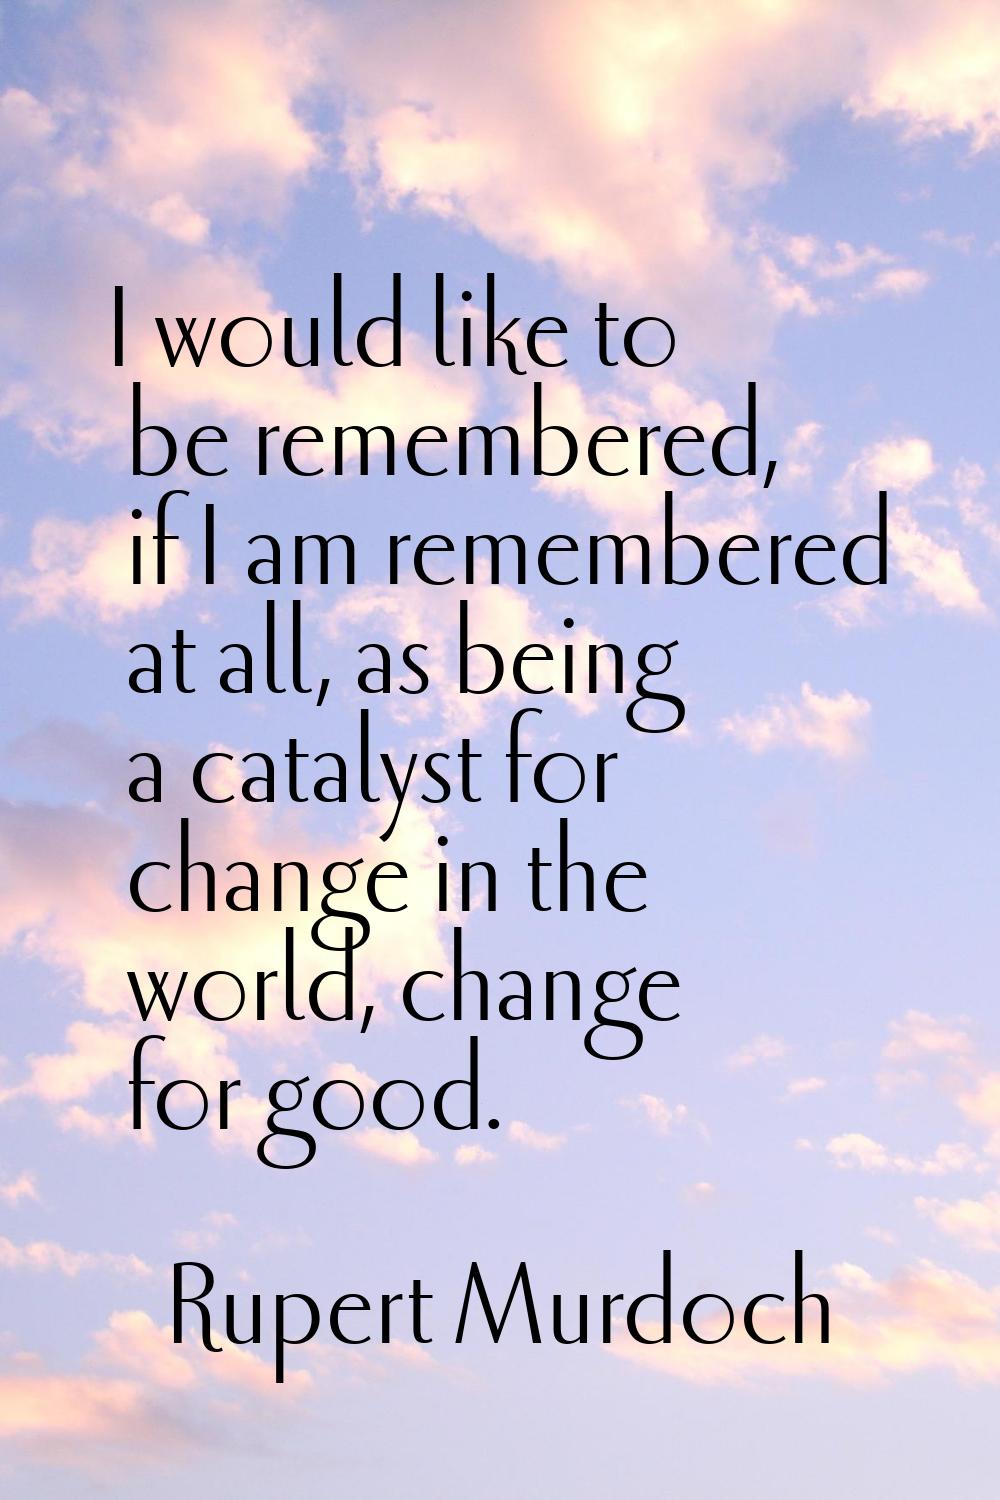 I would like to be remembered, if I am remembered at all, as being a catalyst for change in the wor